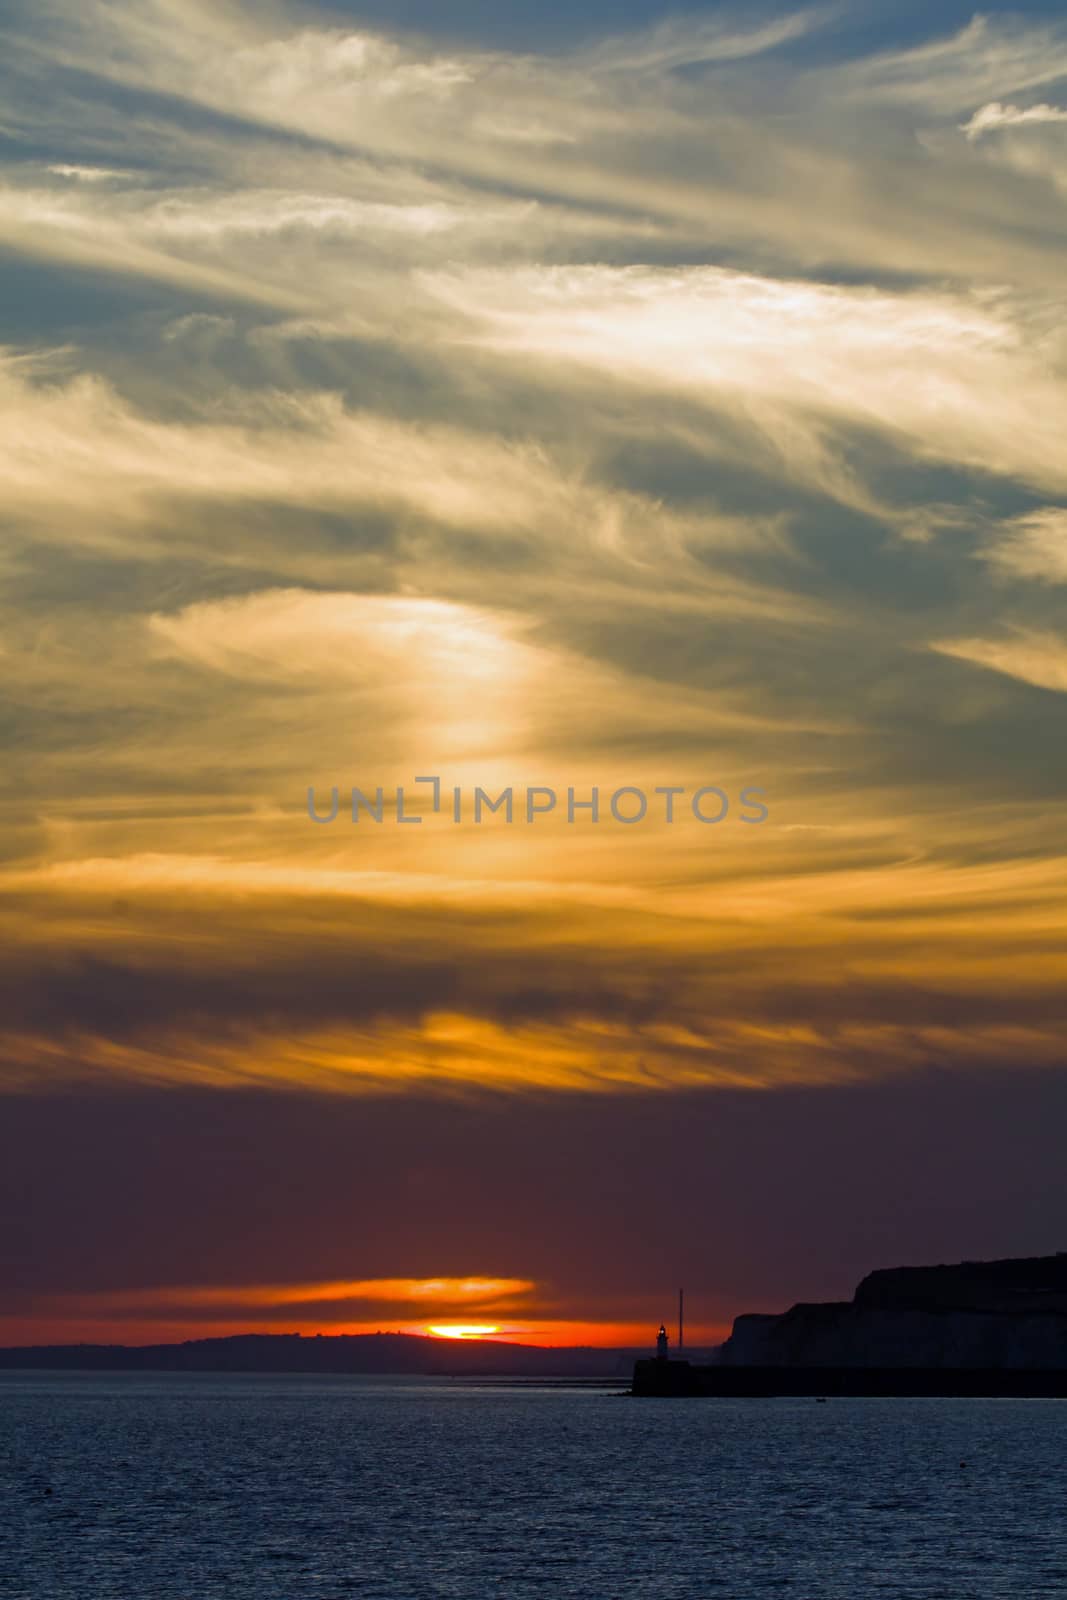 Sunset at Newhaven, with clouds and Newhaven Lighthouse.